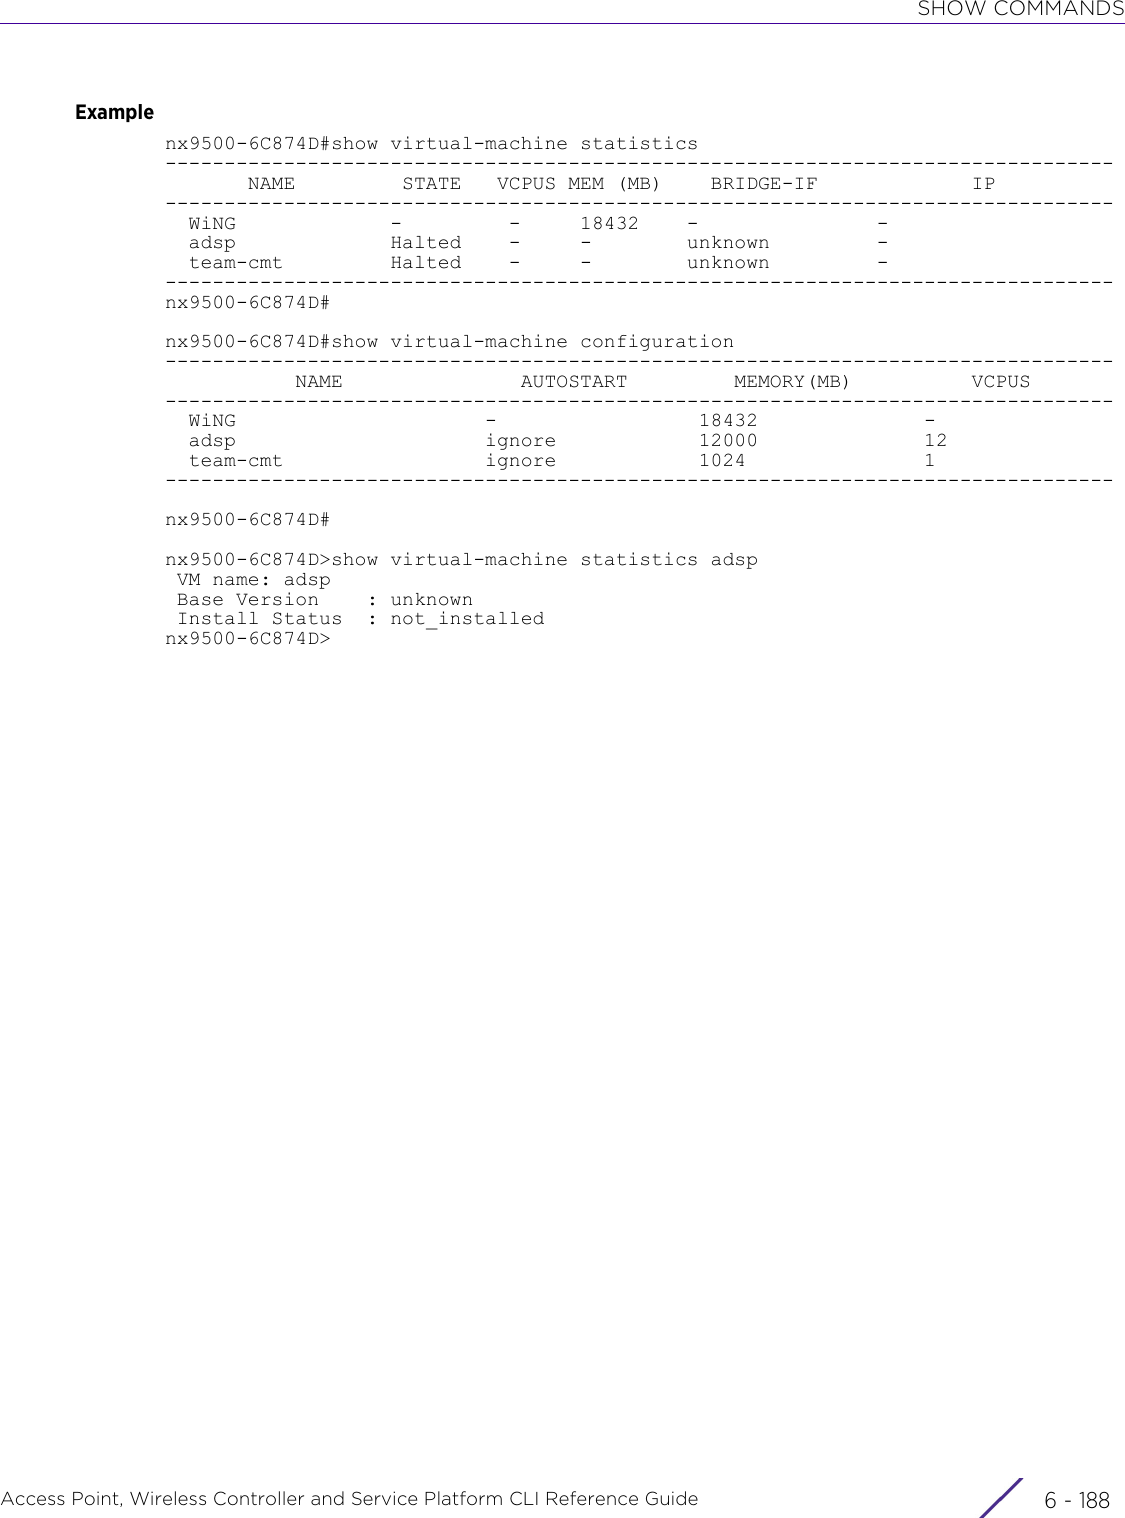 SHOW COMMANDSAccess Point, Wireless Controller and Service Platform CLI Reference Guide  6 - 188Examplenx9500-6C874D#show virtual-machine statistics--------------------------------------------------------------------------------       NAME         STATE   VCPUS MEM (MB)    BRIDGE-IF             IP--------------------------------------------------------------------------------  WiNG             -         -     18432    -               -  adsp             Halted    -     -        unknown         -  team-cmt         Halted    -     -        unknown         ---------------------------------------------------------------------------------nx9500-6C874D#nx9500-6C874D#show virtual-machine configuration--------------------------------------------------------------------------------           NAME               AUTOSTART         MEMORY(MB)          VCPUS--------------------------------------------------------------------------------  WiNG                     -                 18432              -  adsp                     ignore            12000              12  team-cmt                 ignore            1024               1--------------------------------------------------------------------------------nx9500-6C874D#nx9500-6C874D&gt;show virtual-machine statistics adsp VM name: adsp Base Version    : unknown Install Status  : not_installednx9500-6C874D&gt;